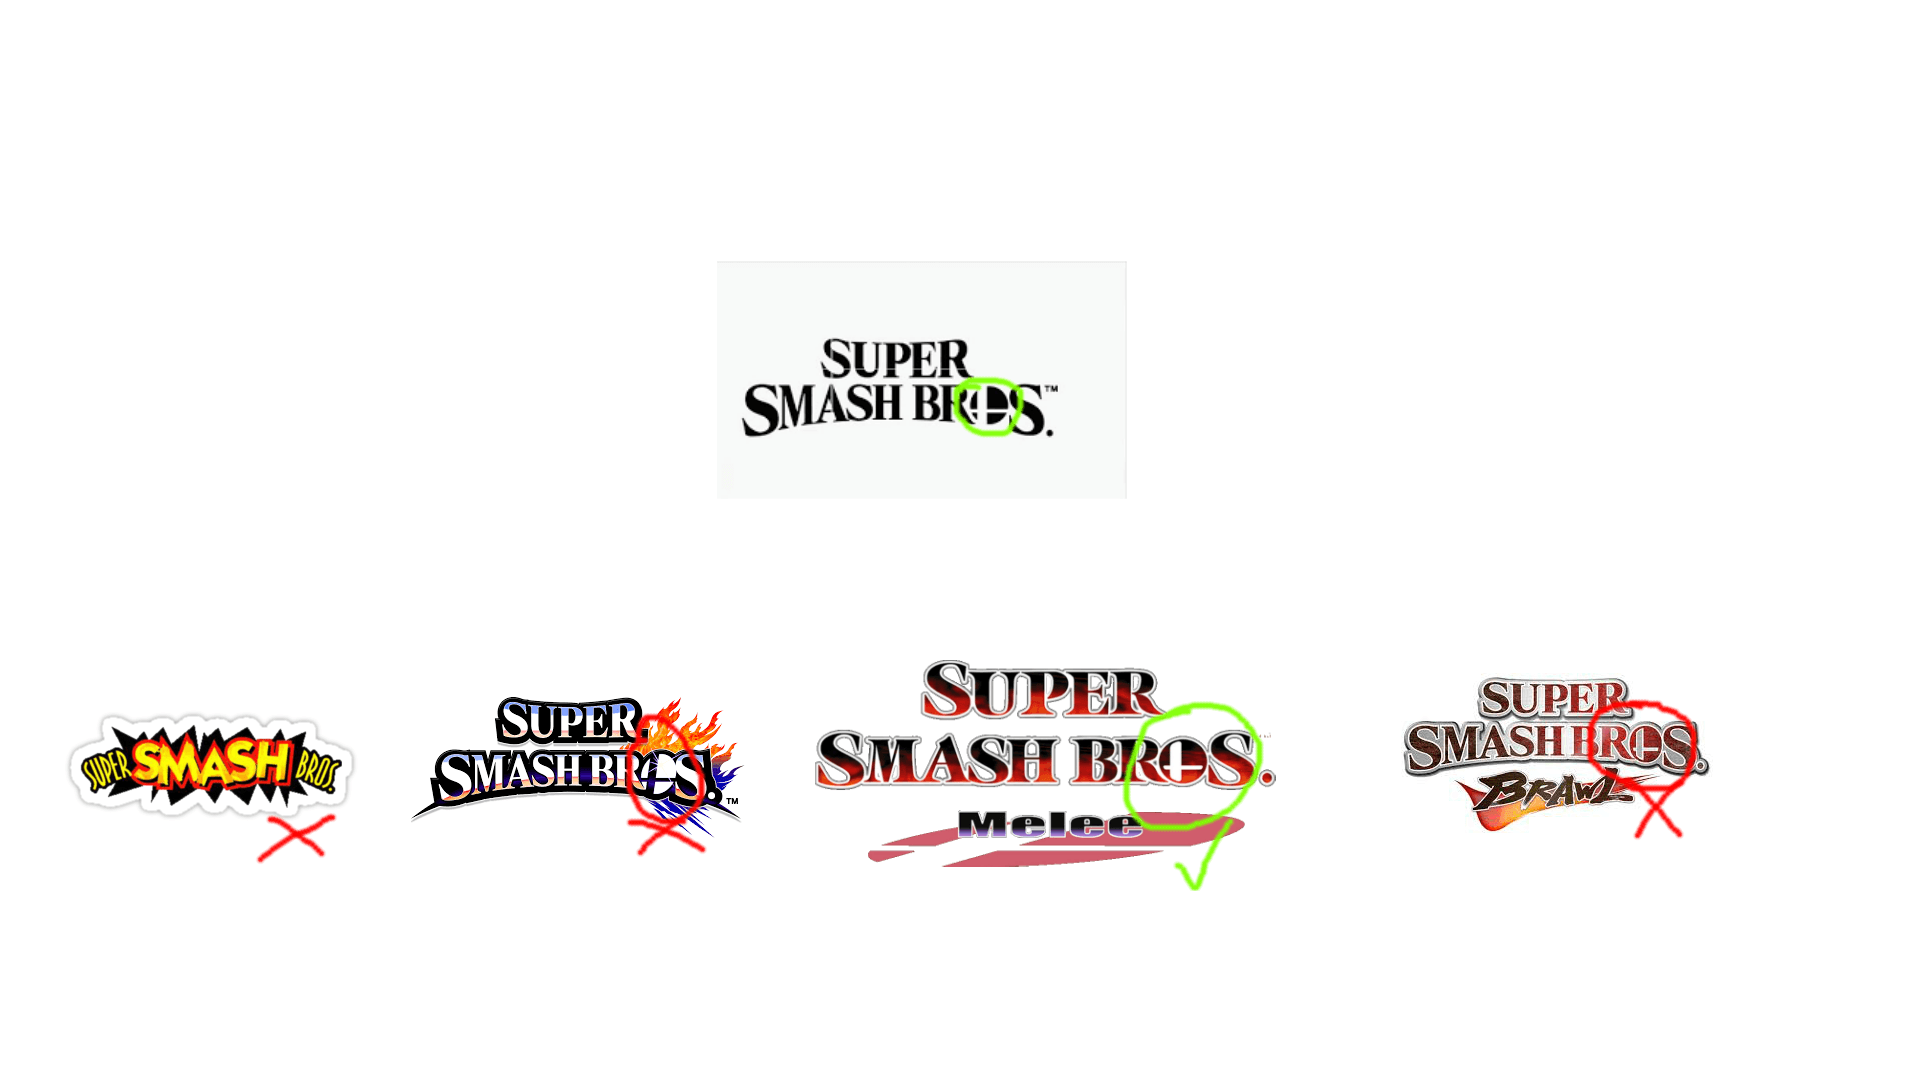 Orange Ball Logo - The smash ball in the new logo is the exact same as the one in melee